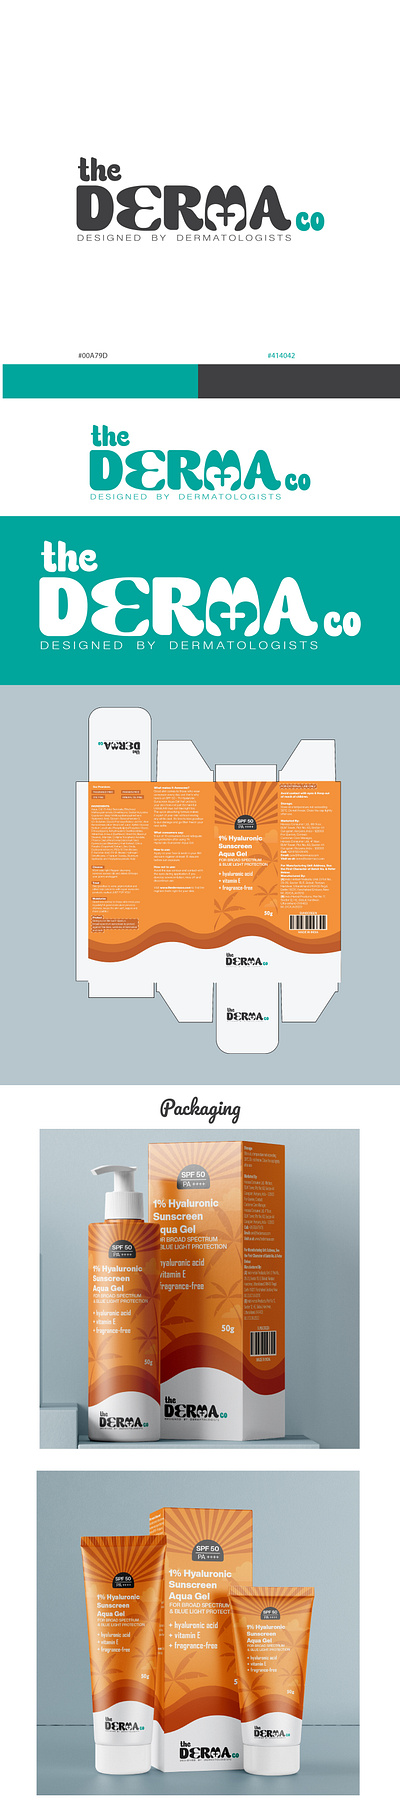 The Derma co - Logo rebranding and Packaging logo logo dsign logo rebranding packaging product design the derma co